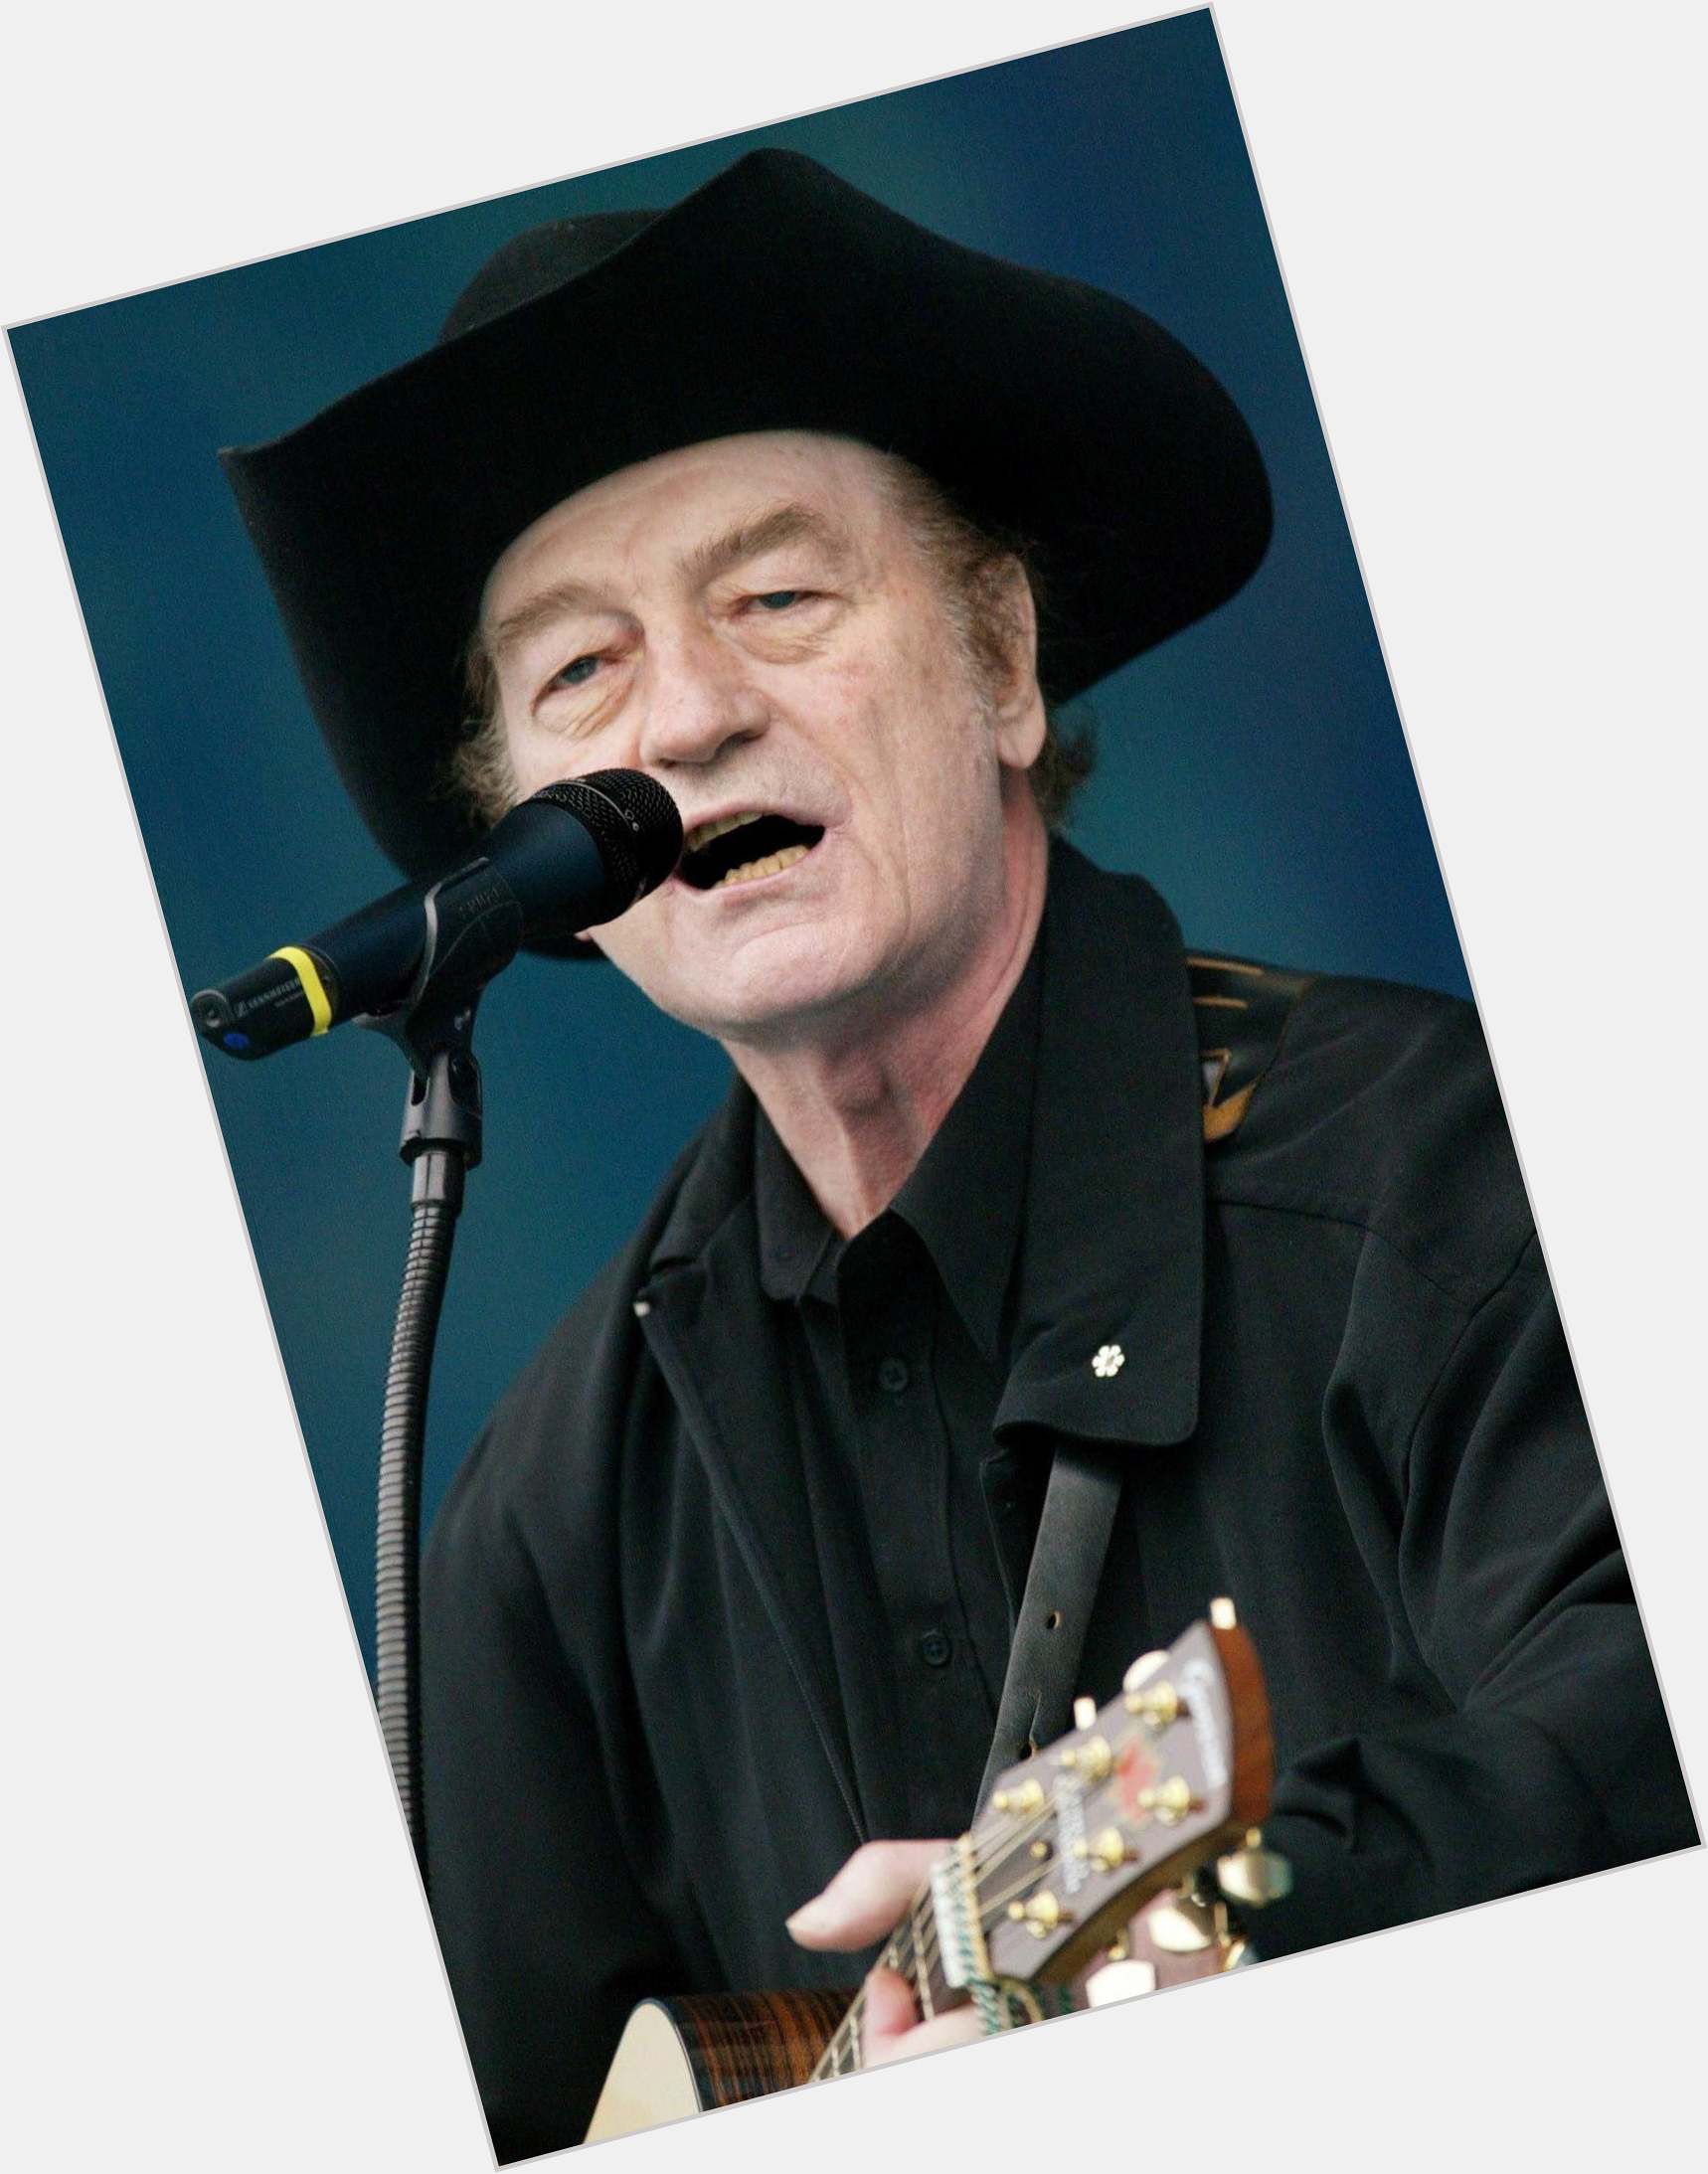 Stompin' Tom Connors birthday 2015